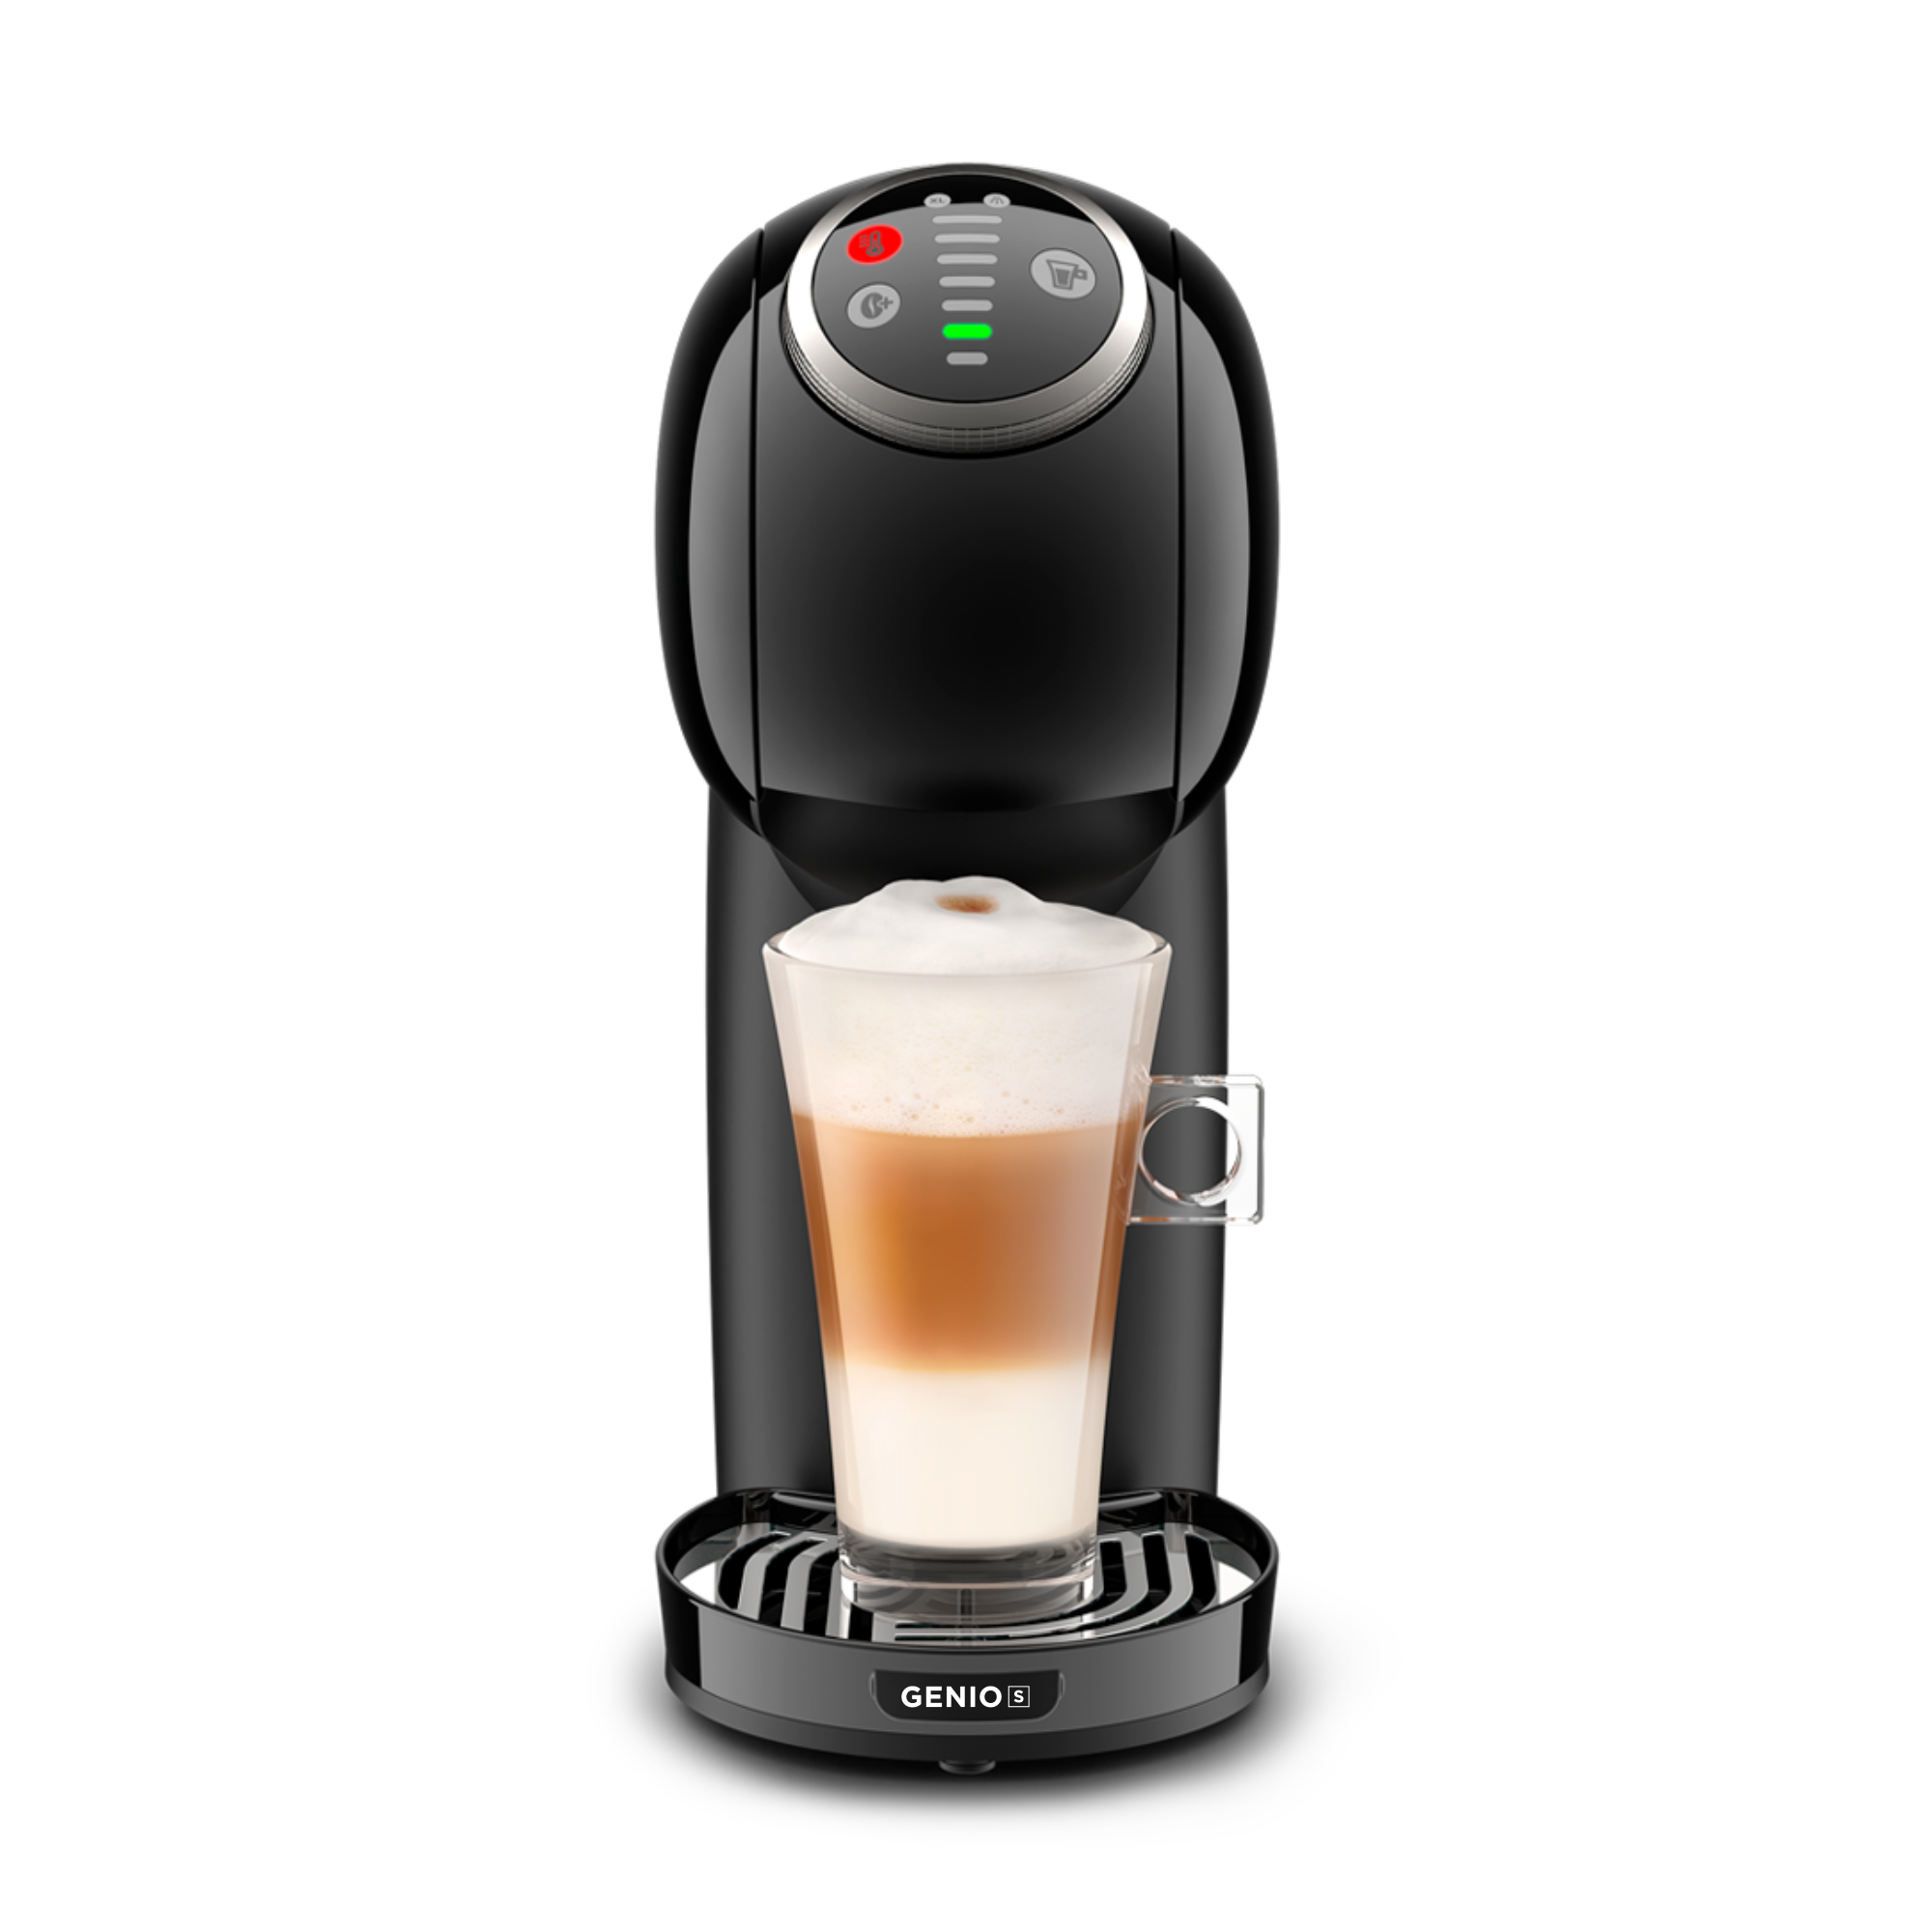 How To Use The Dolce Gusto Coffee Machine